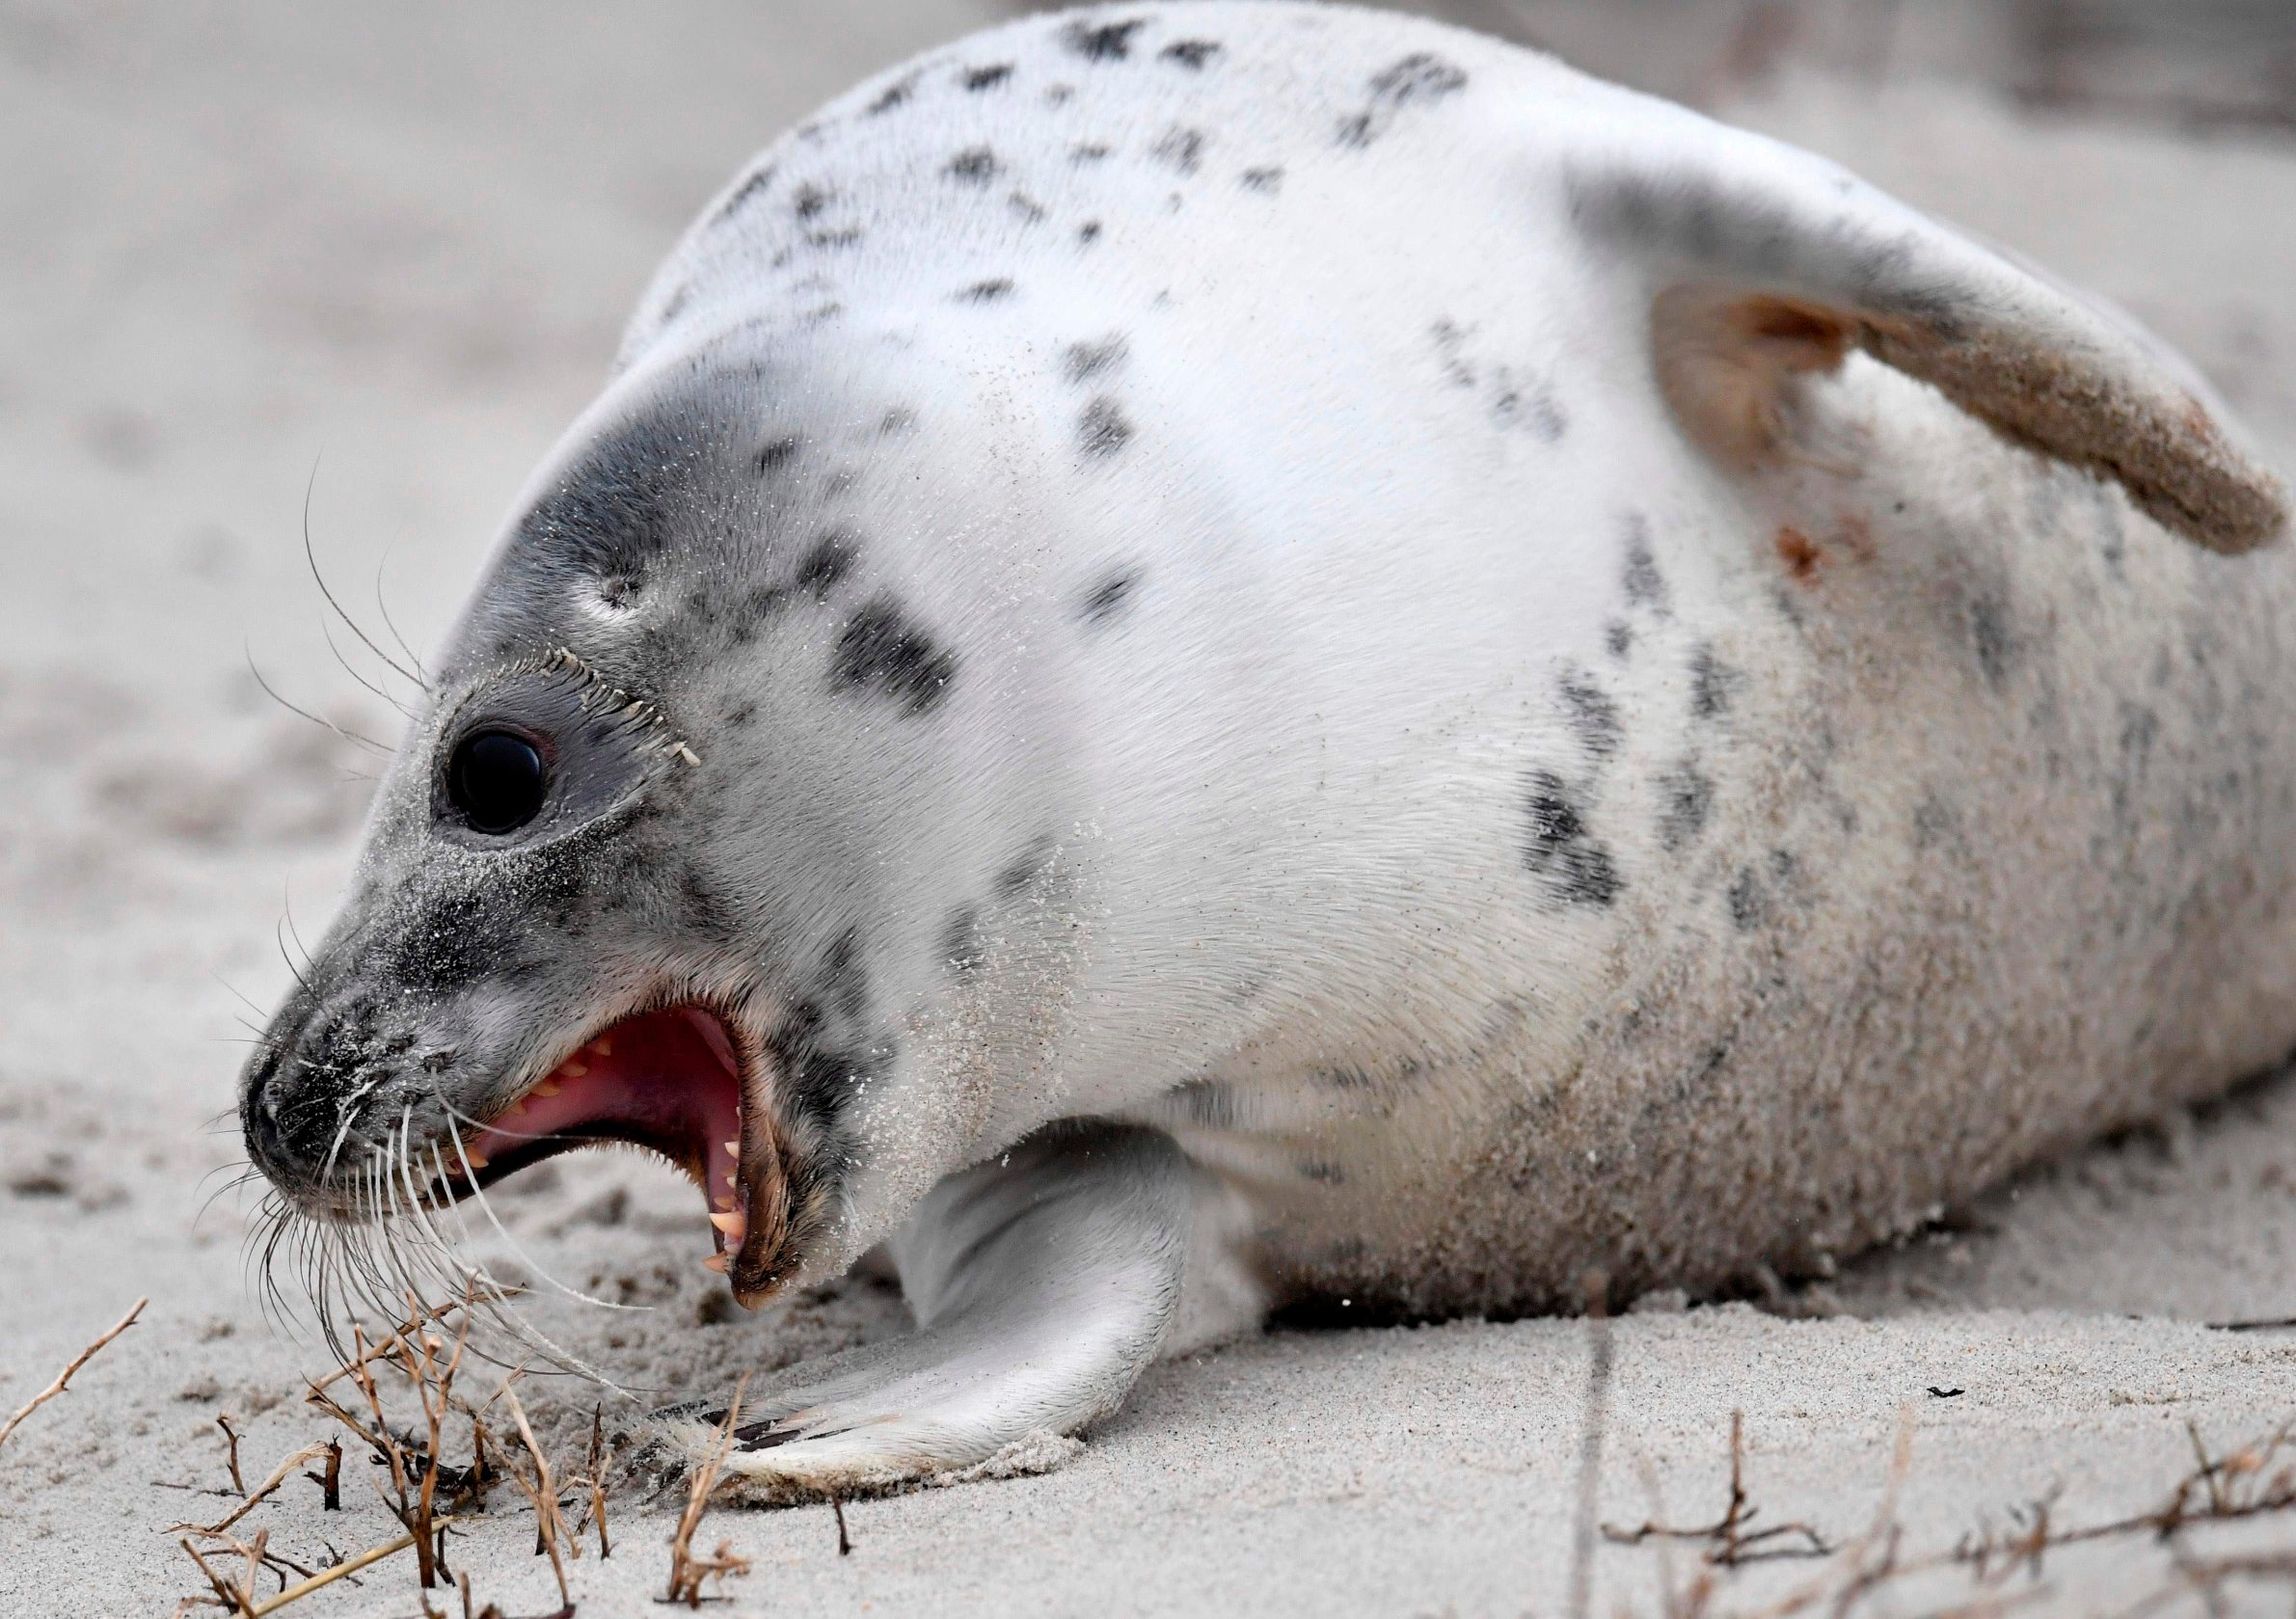 A young grey seal plays with dried plants on a beach on the north Sea island of Helgoland, Germany, on January 5, 2020. - Hundreds of Grey Seals use the island to give birth to their pups, usually between the months of November and January. The pups, after 3 weeks of nursing, are then left to fend for themselves. 524 grey seal births have been recorded in the period from November 13 to December 26, 2019. (Photo by John MACDOUGALL / AFP)